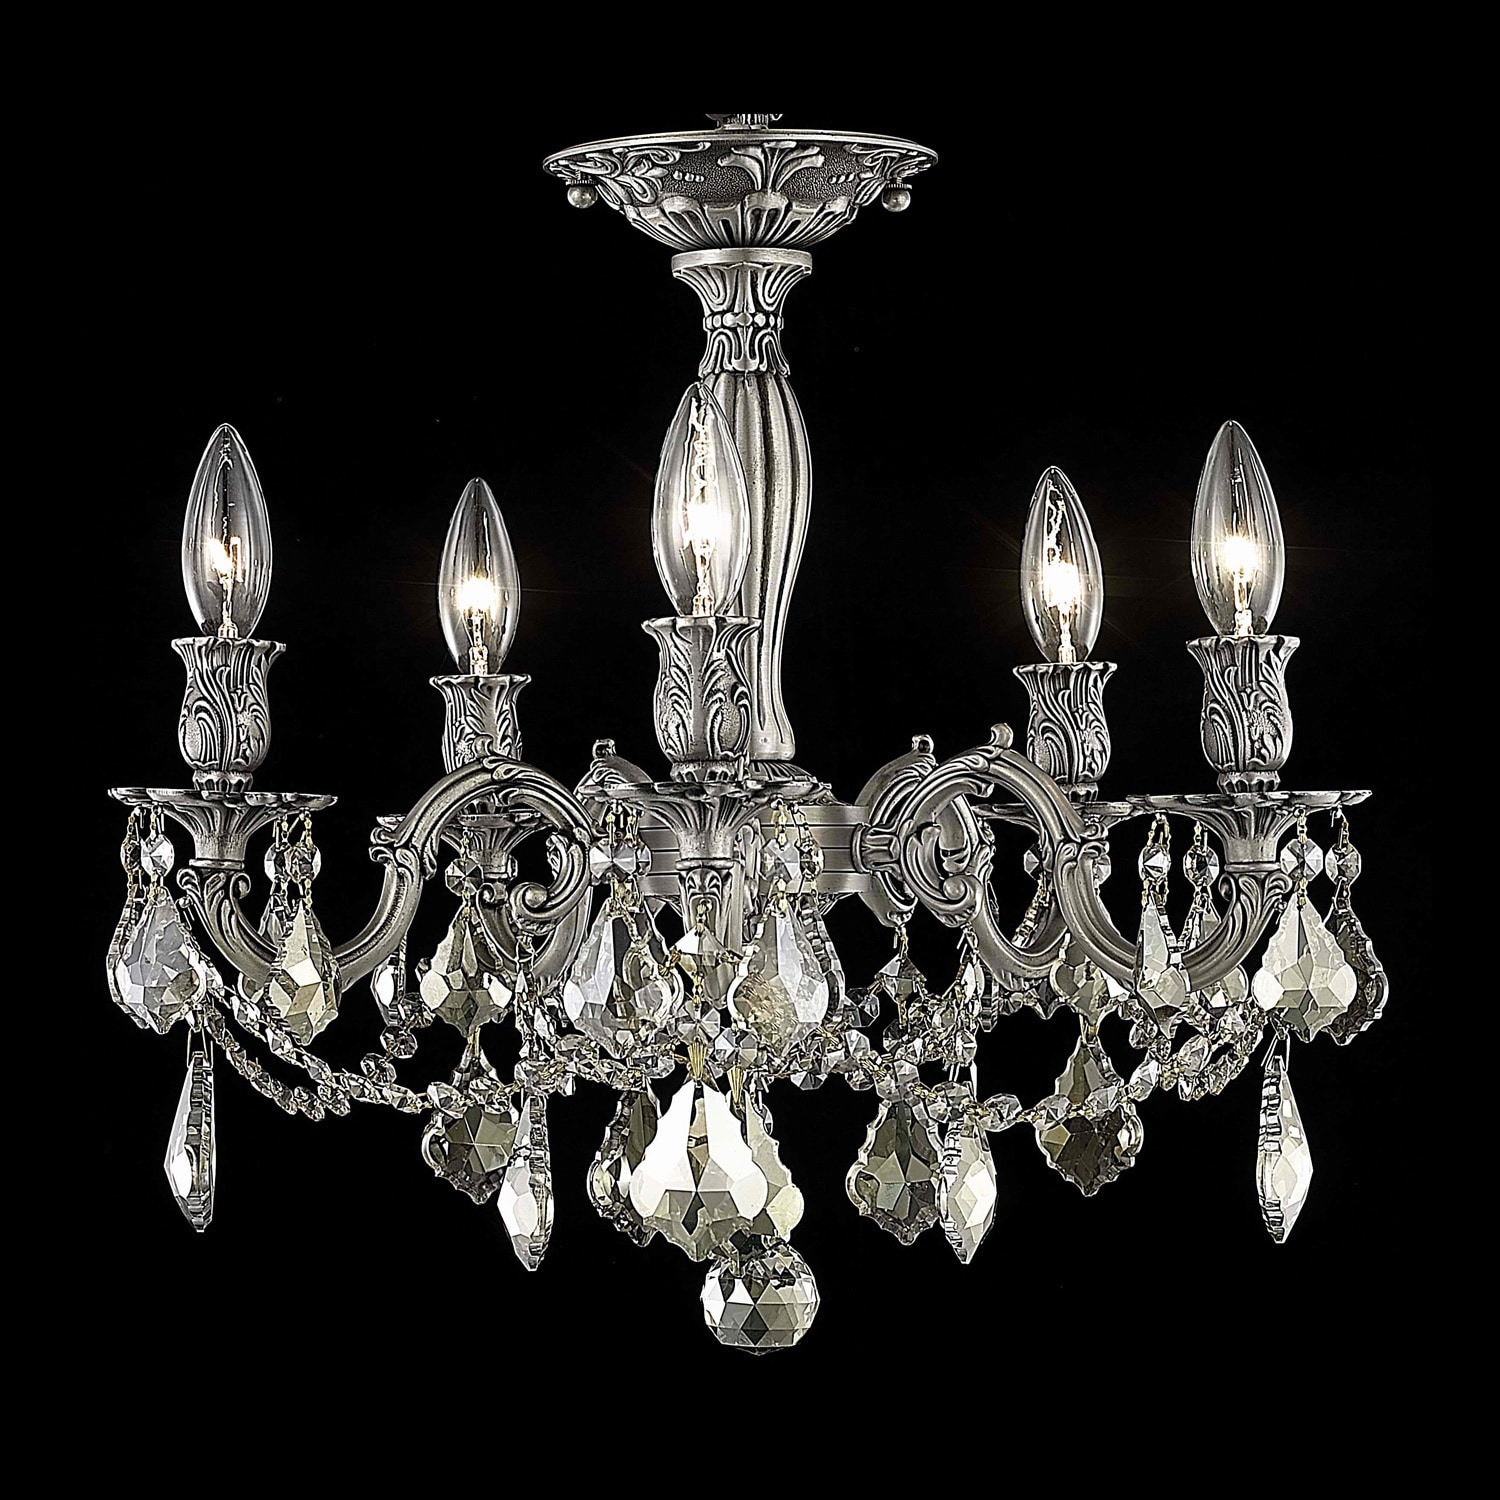 Christopher Knight Home Meilen 5 light Royal Cut Gold Crystal And Pewter Flush Mount (Crystal and AluminumFinish PewterNumber of lights Five (5)Requires five(5) 60 watt max bulb (not included)Bulb type E12, 110 Volt 125 VoltDimensions 18 inches long x